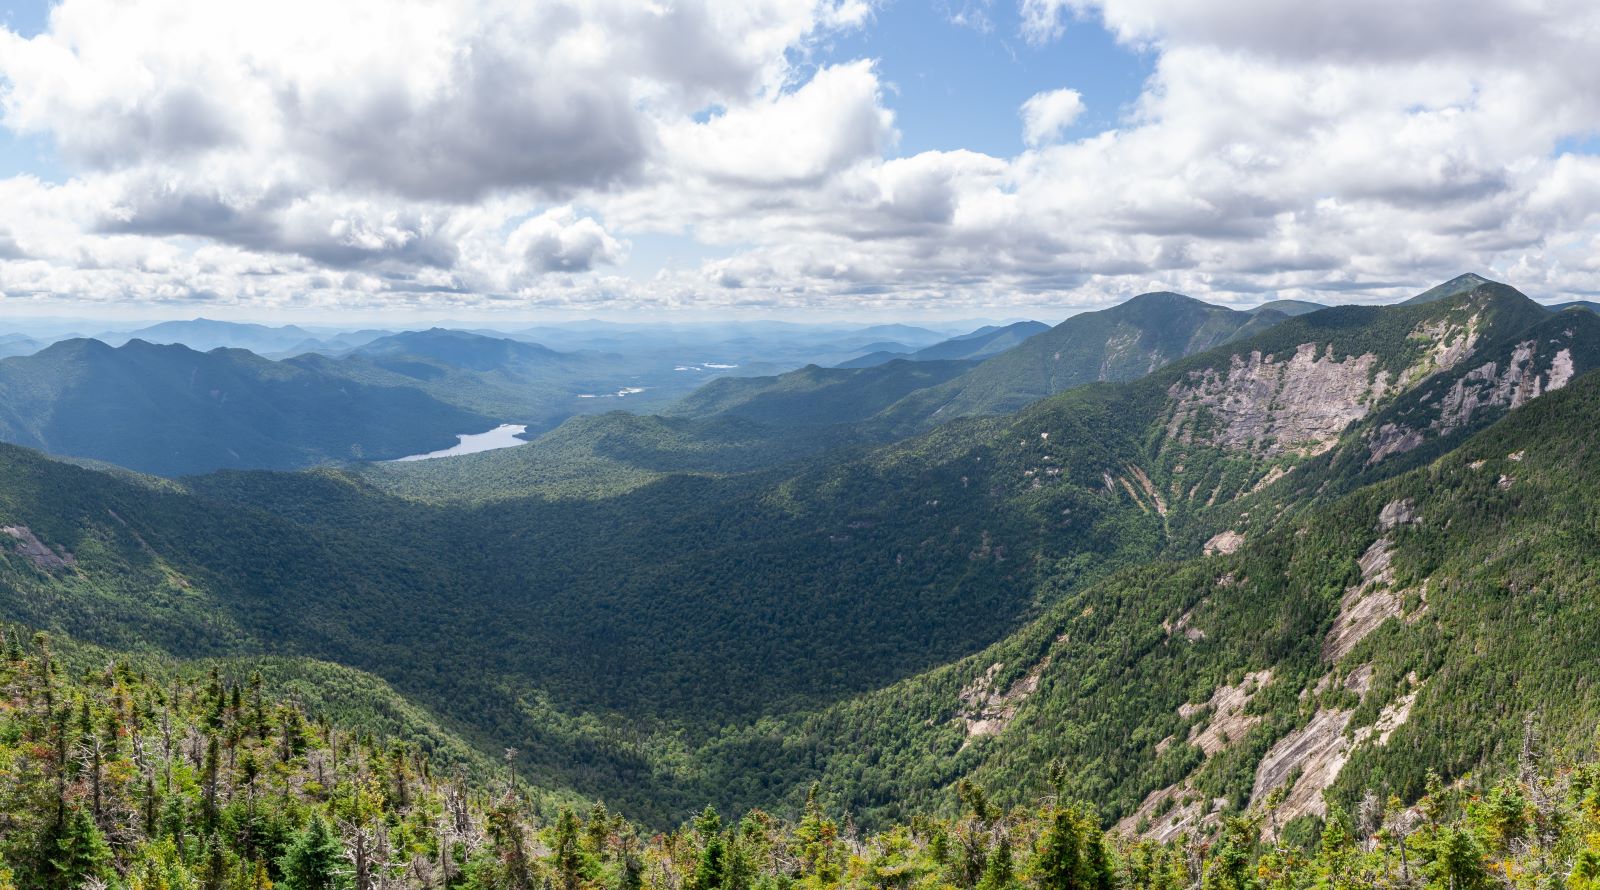 <p class="wp-caption-text">Image Credit: Shutterstock / Raphael Rivest</p>  <p>Explore the heart of the Adirondack Mountains, with its pristine lakes and dense forests. Ideal for nature lovers and outdoor enthusiasts.</p>